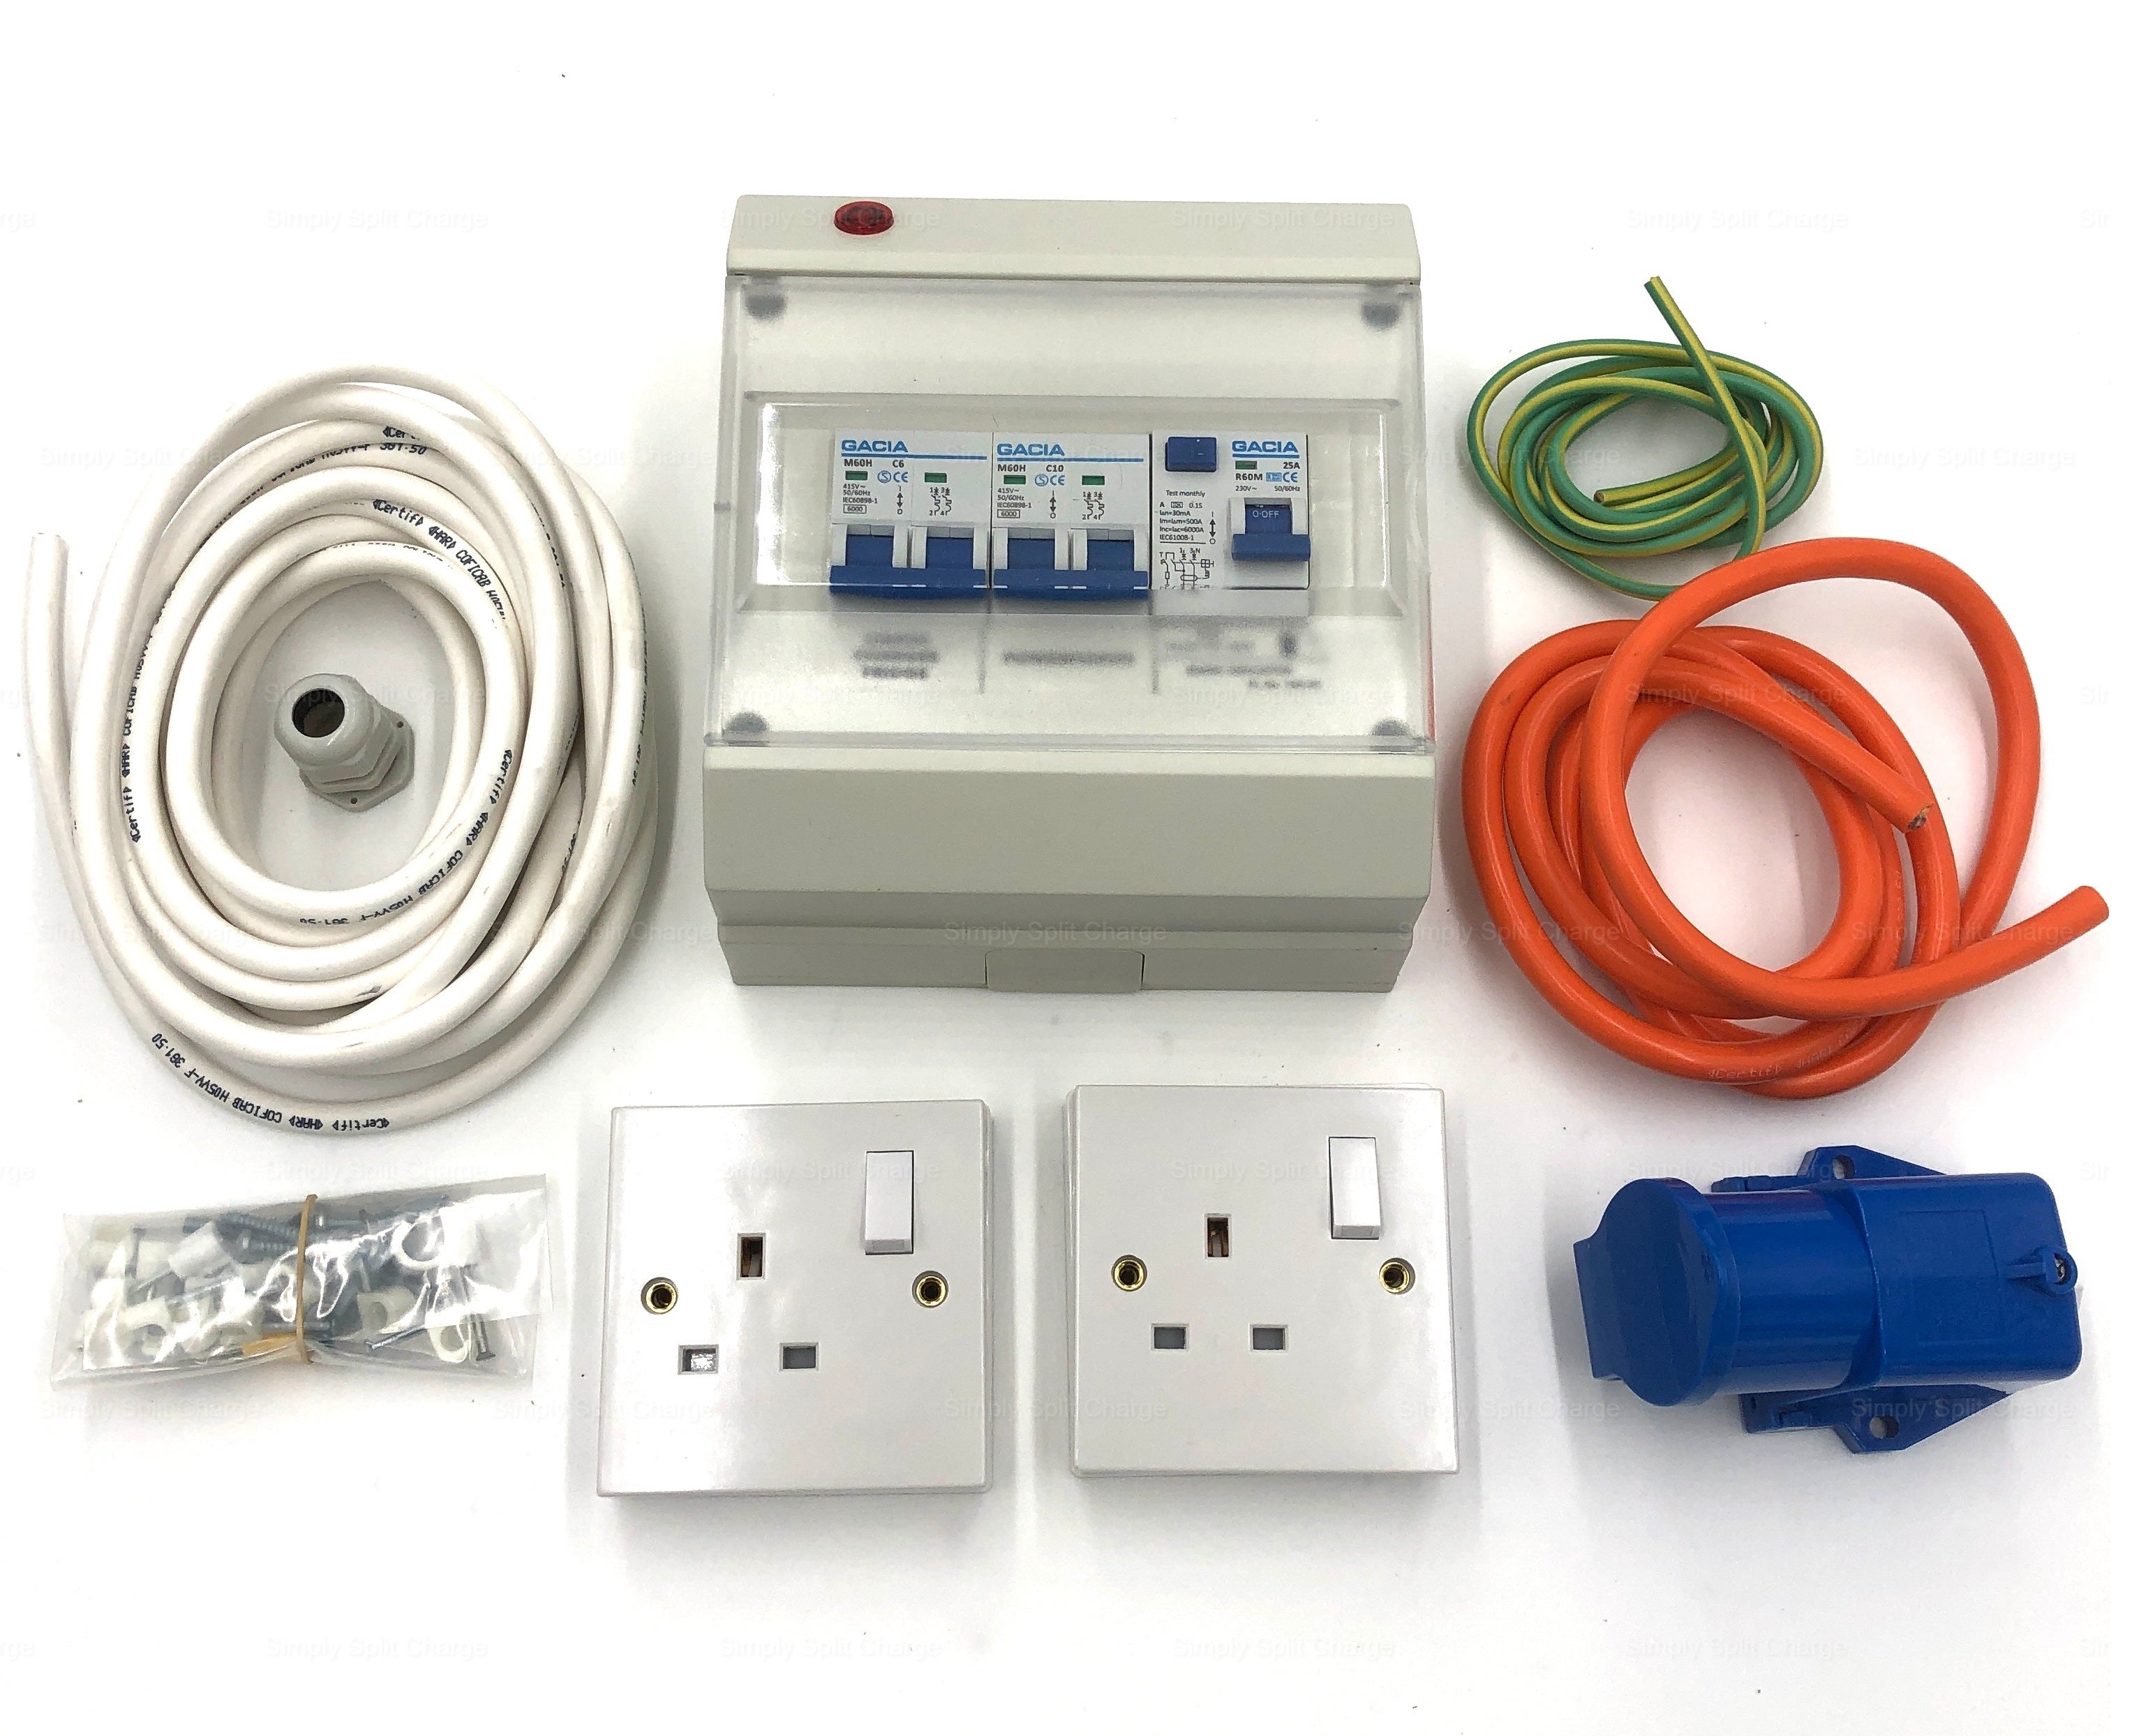 Campervan Electric Kit - Victron Isolated 30a DC-DC Charger, IP22 20a 240v Charger, Hook Up, 175w Solaid Frame Solar, Fuse Box, Battery Distribution with Smartshunt